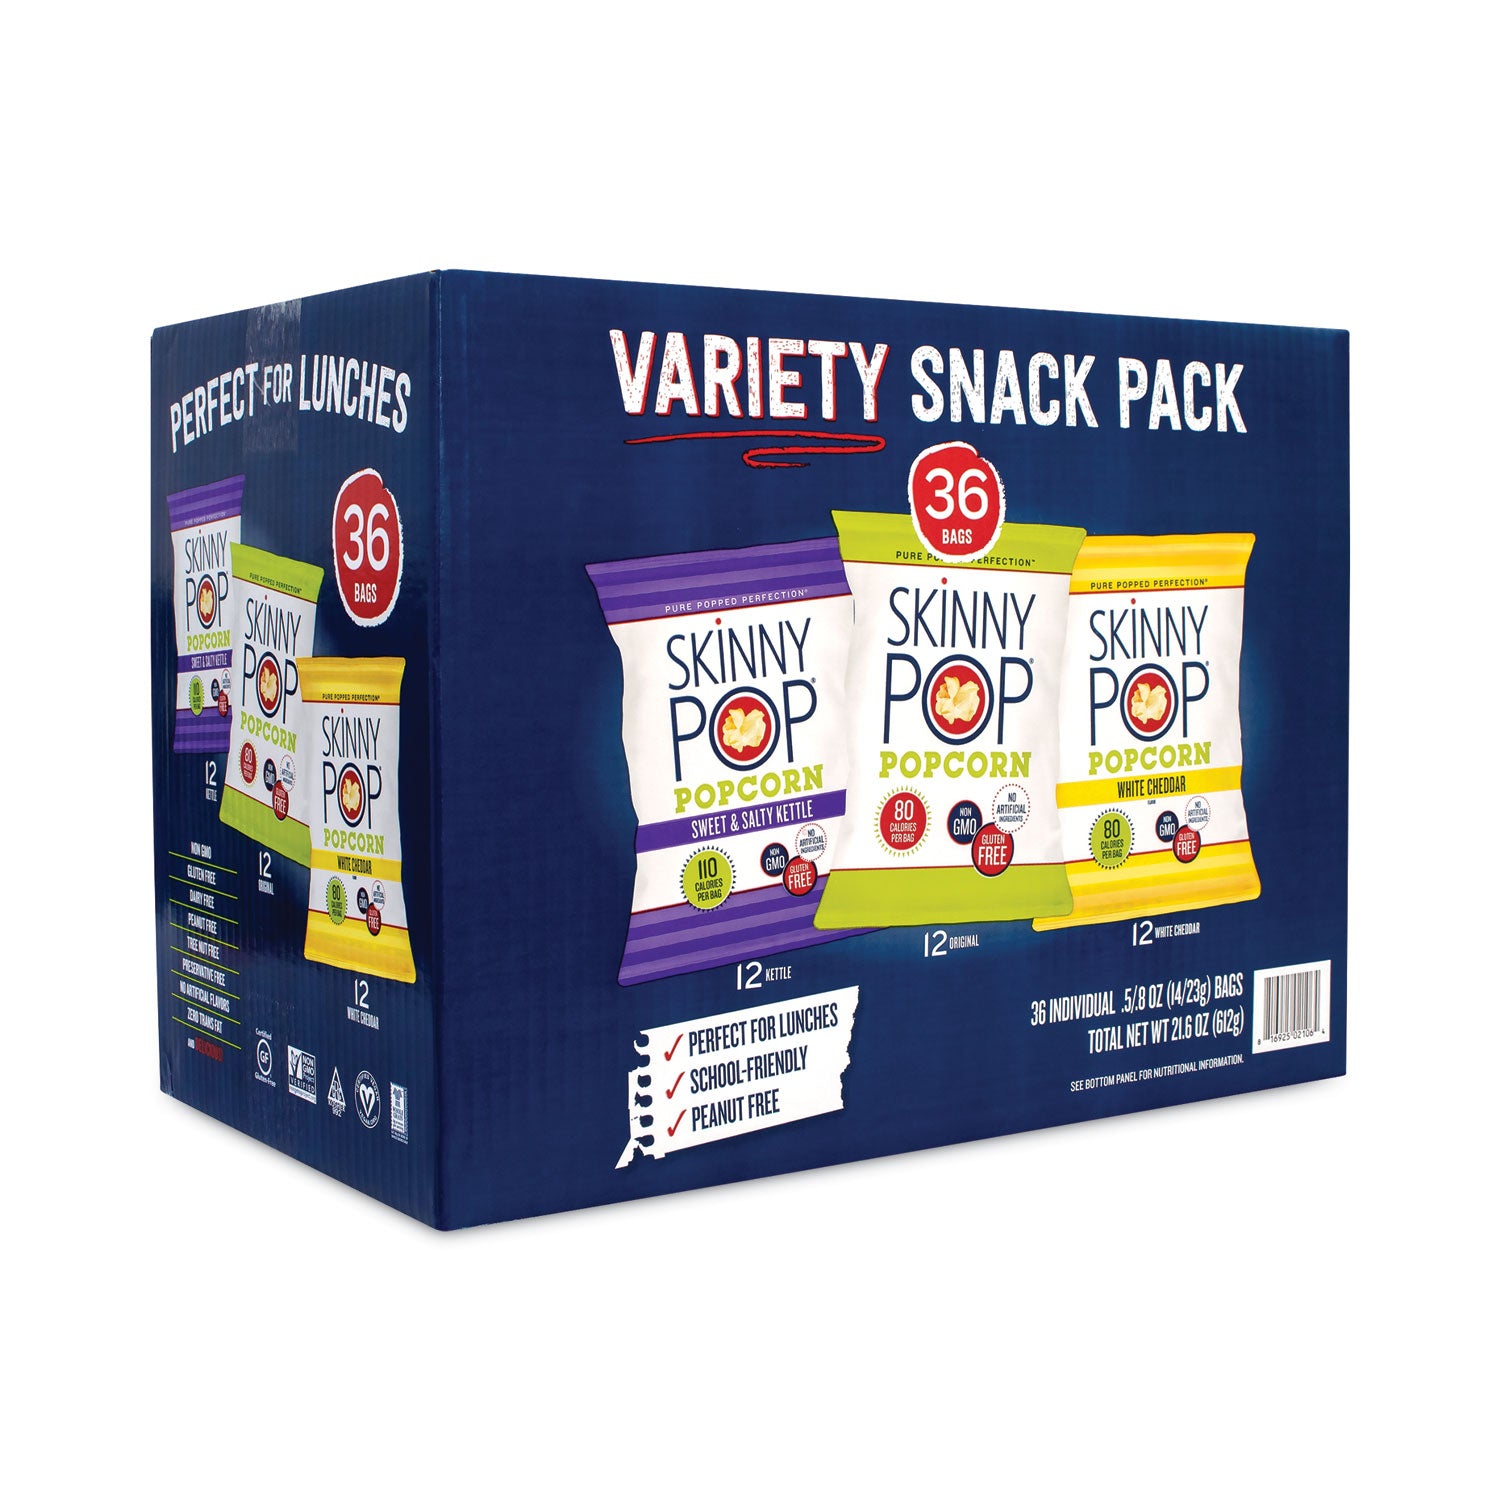 popcorn-variety-snack-pack-05-oz-bag-36-bags-carton-ships-in-1-3-business-days_grr22001049 - 1